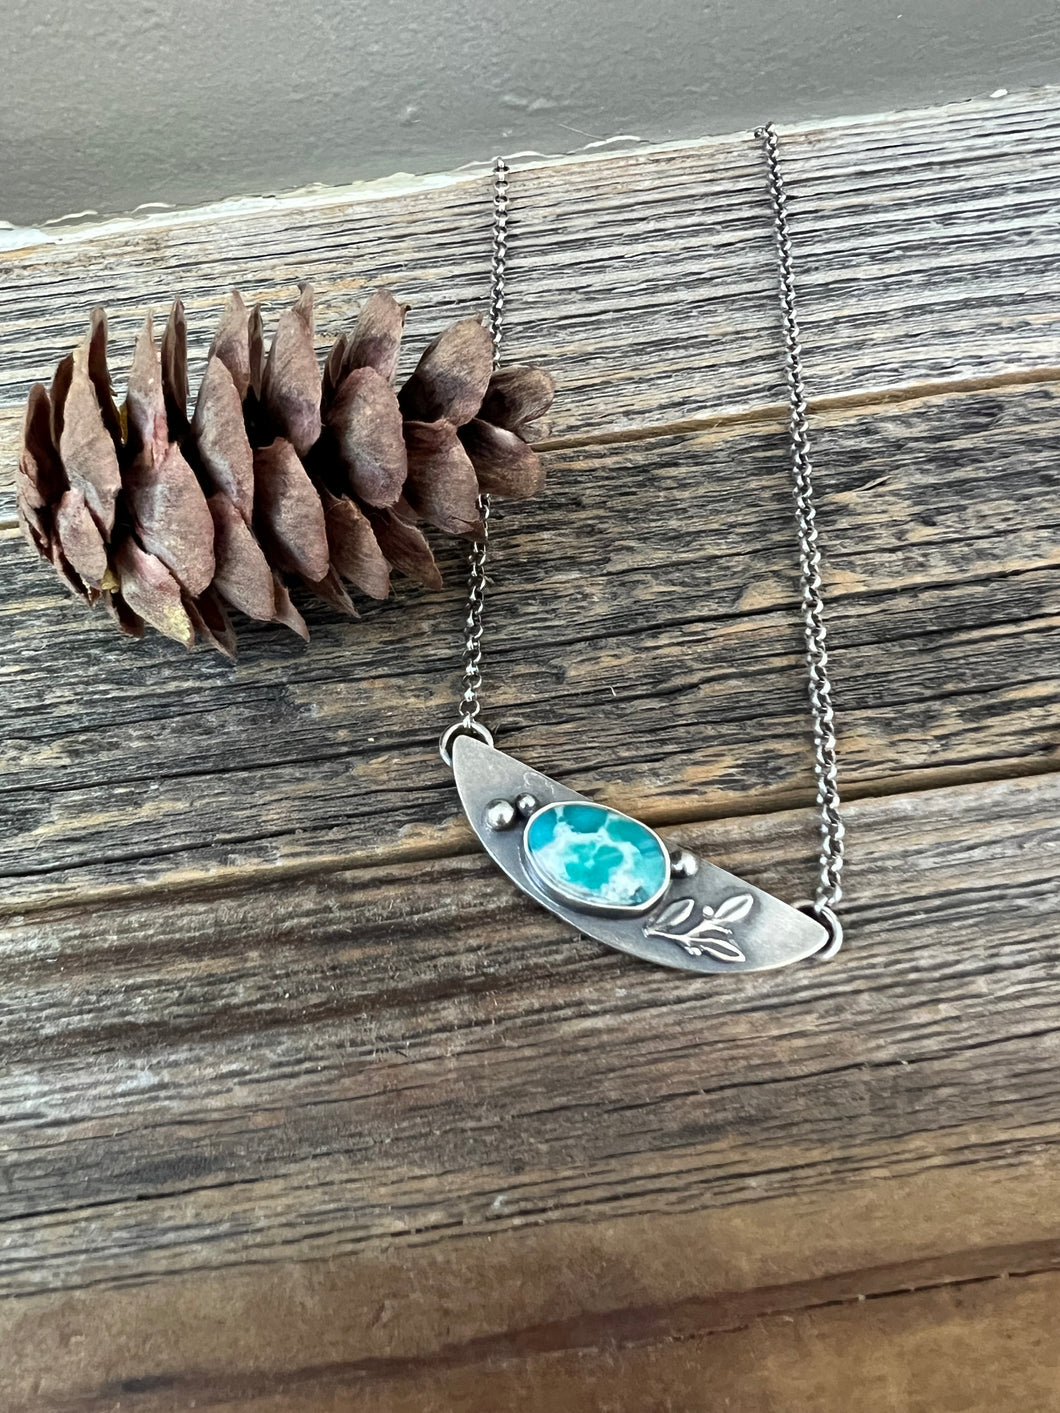 Whitewater Turquoise Necklace- 17” sterling silver